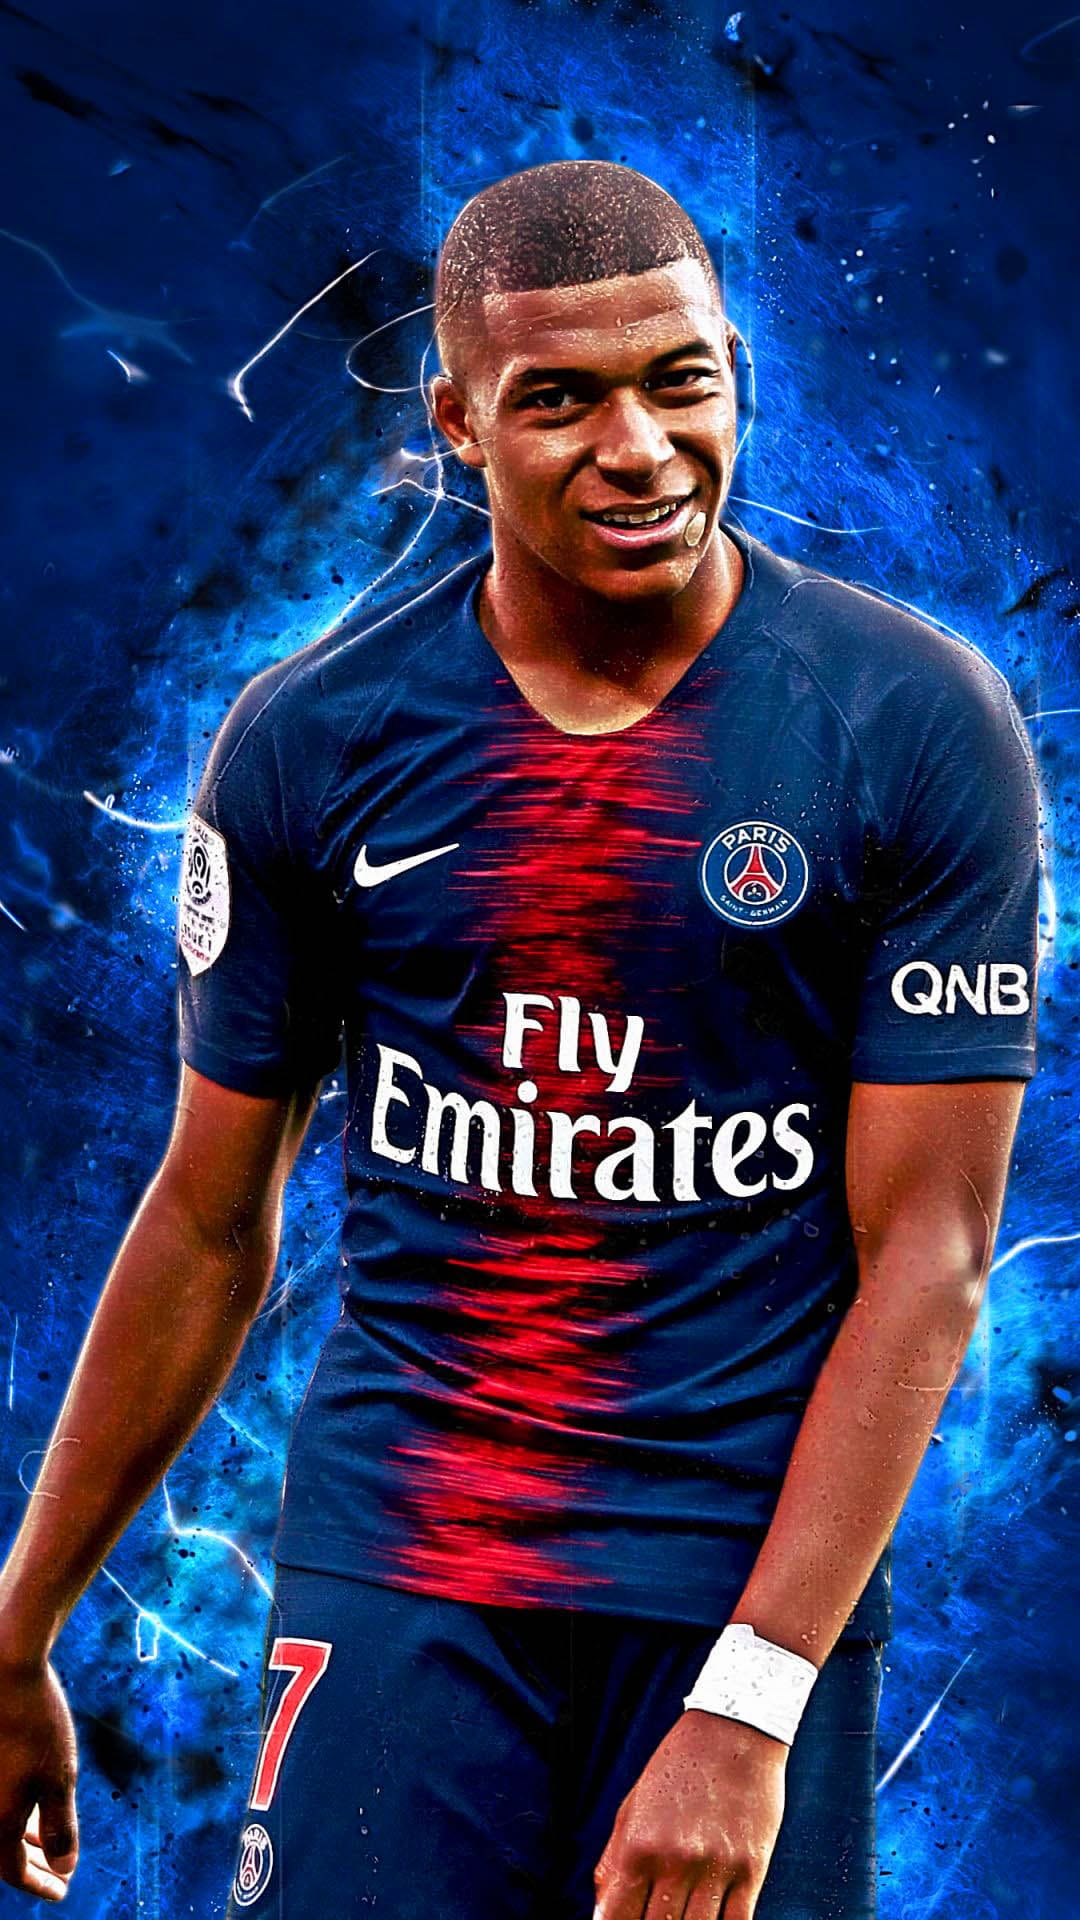 Mbappe Wallpapers